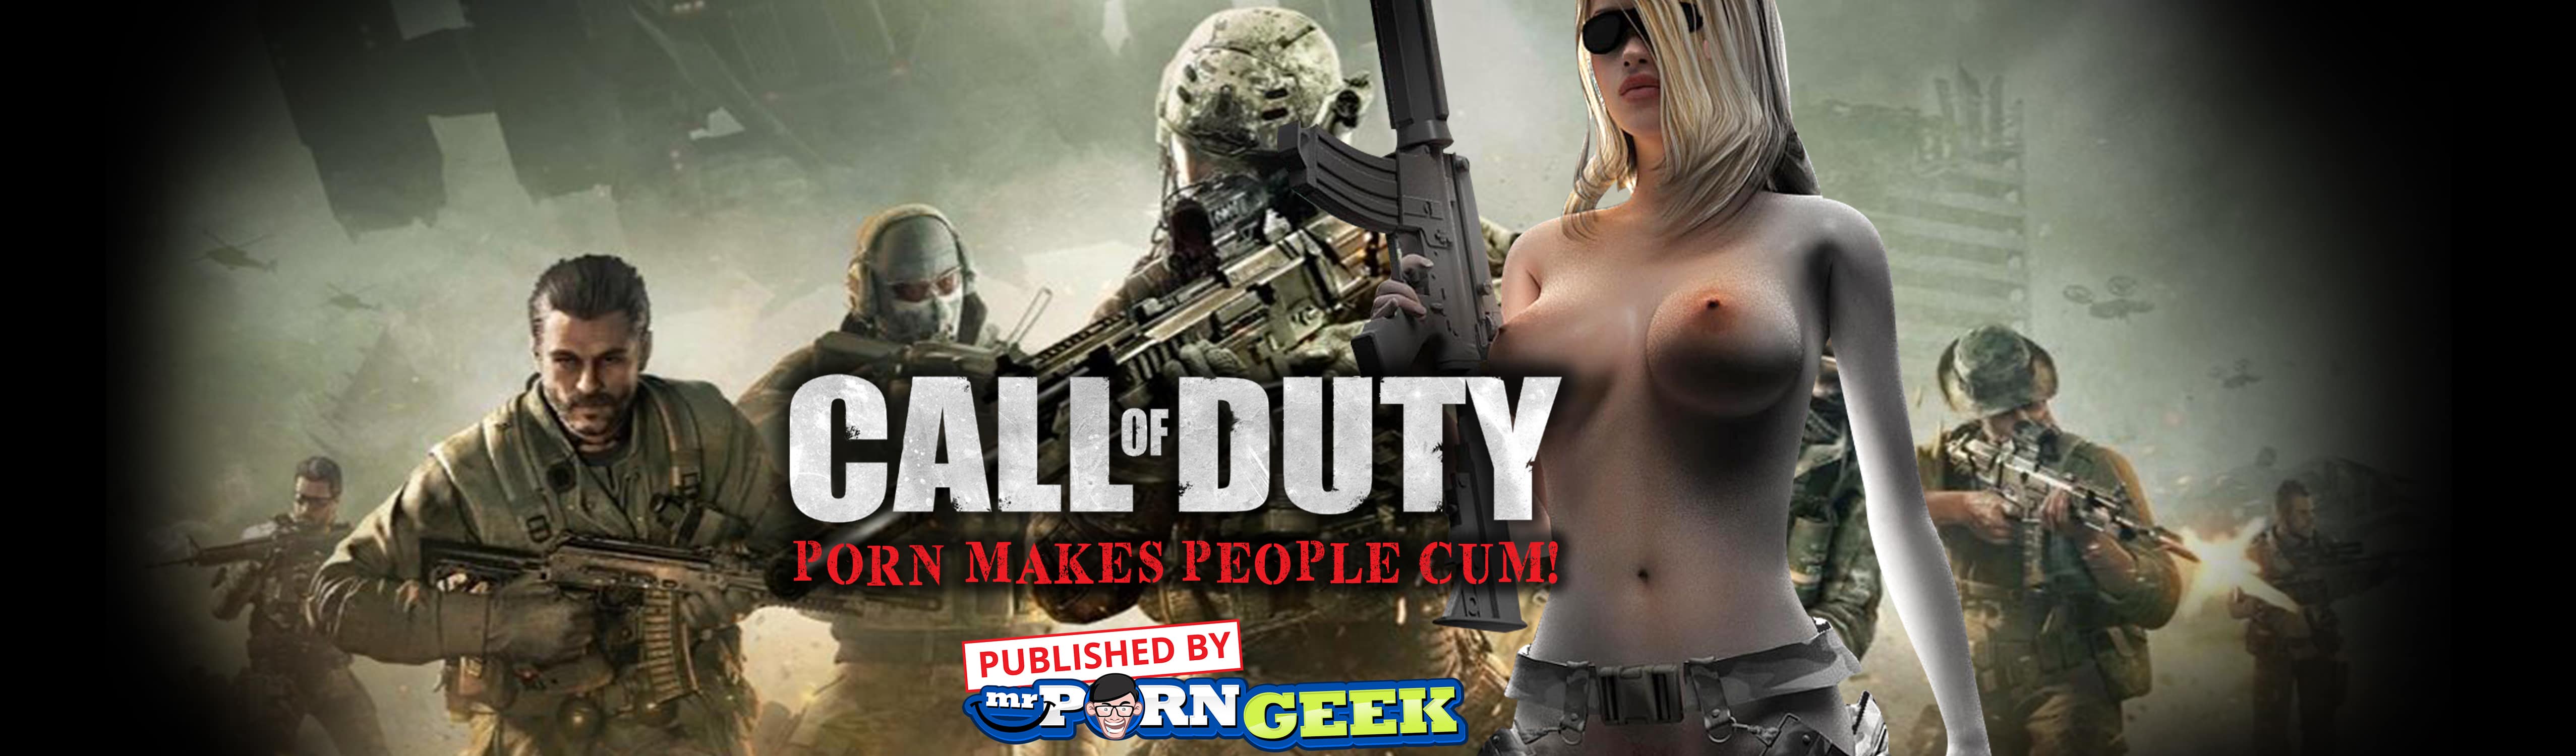 Militry Xxx Featuring - Call Of Duty Porn Makes People Cum! Find It Here